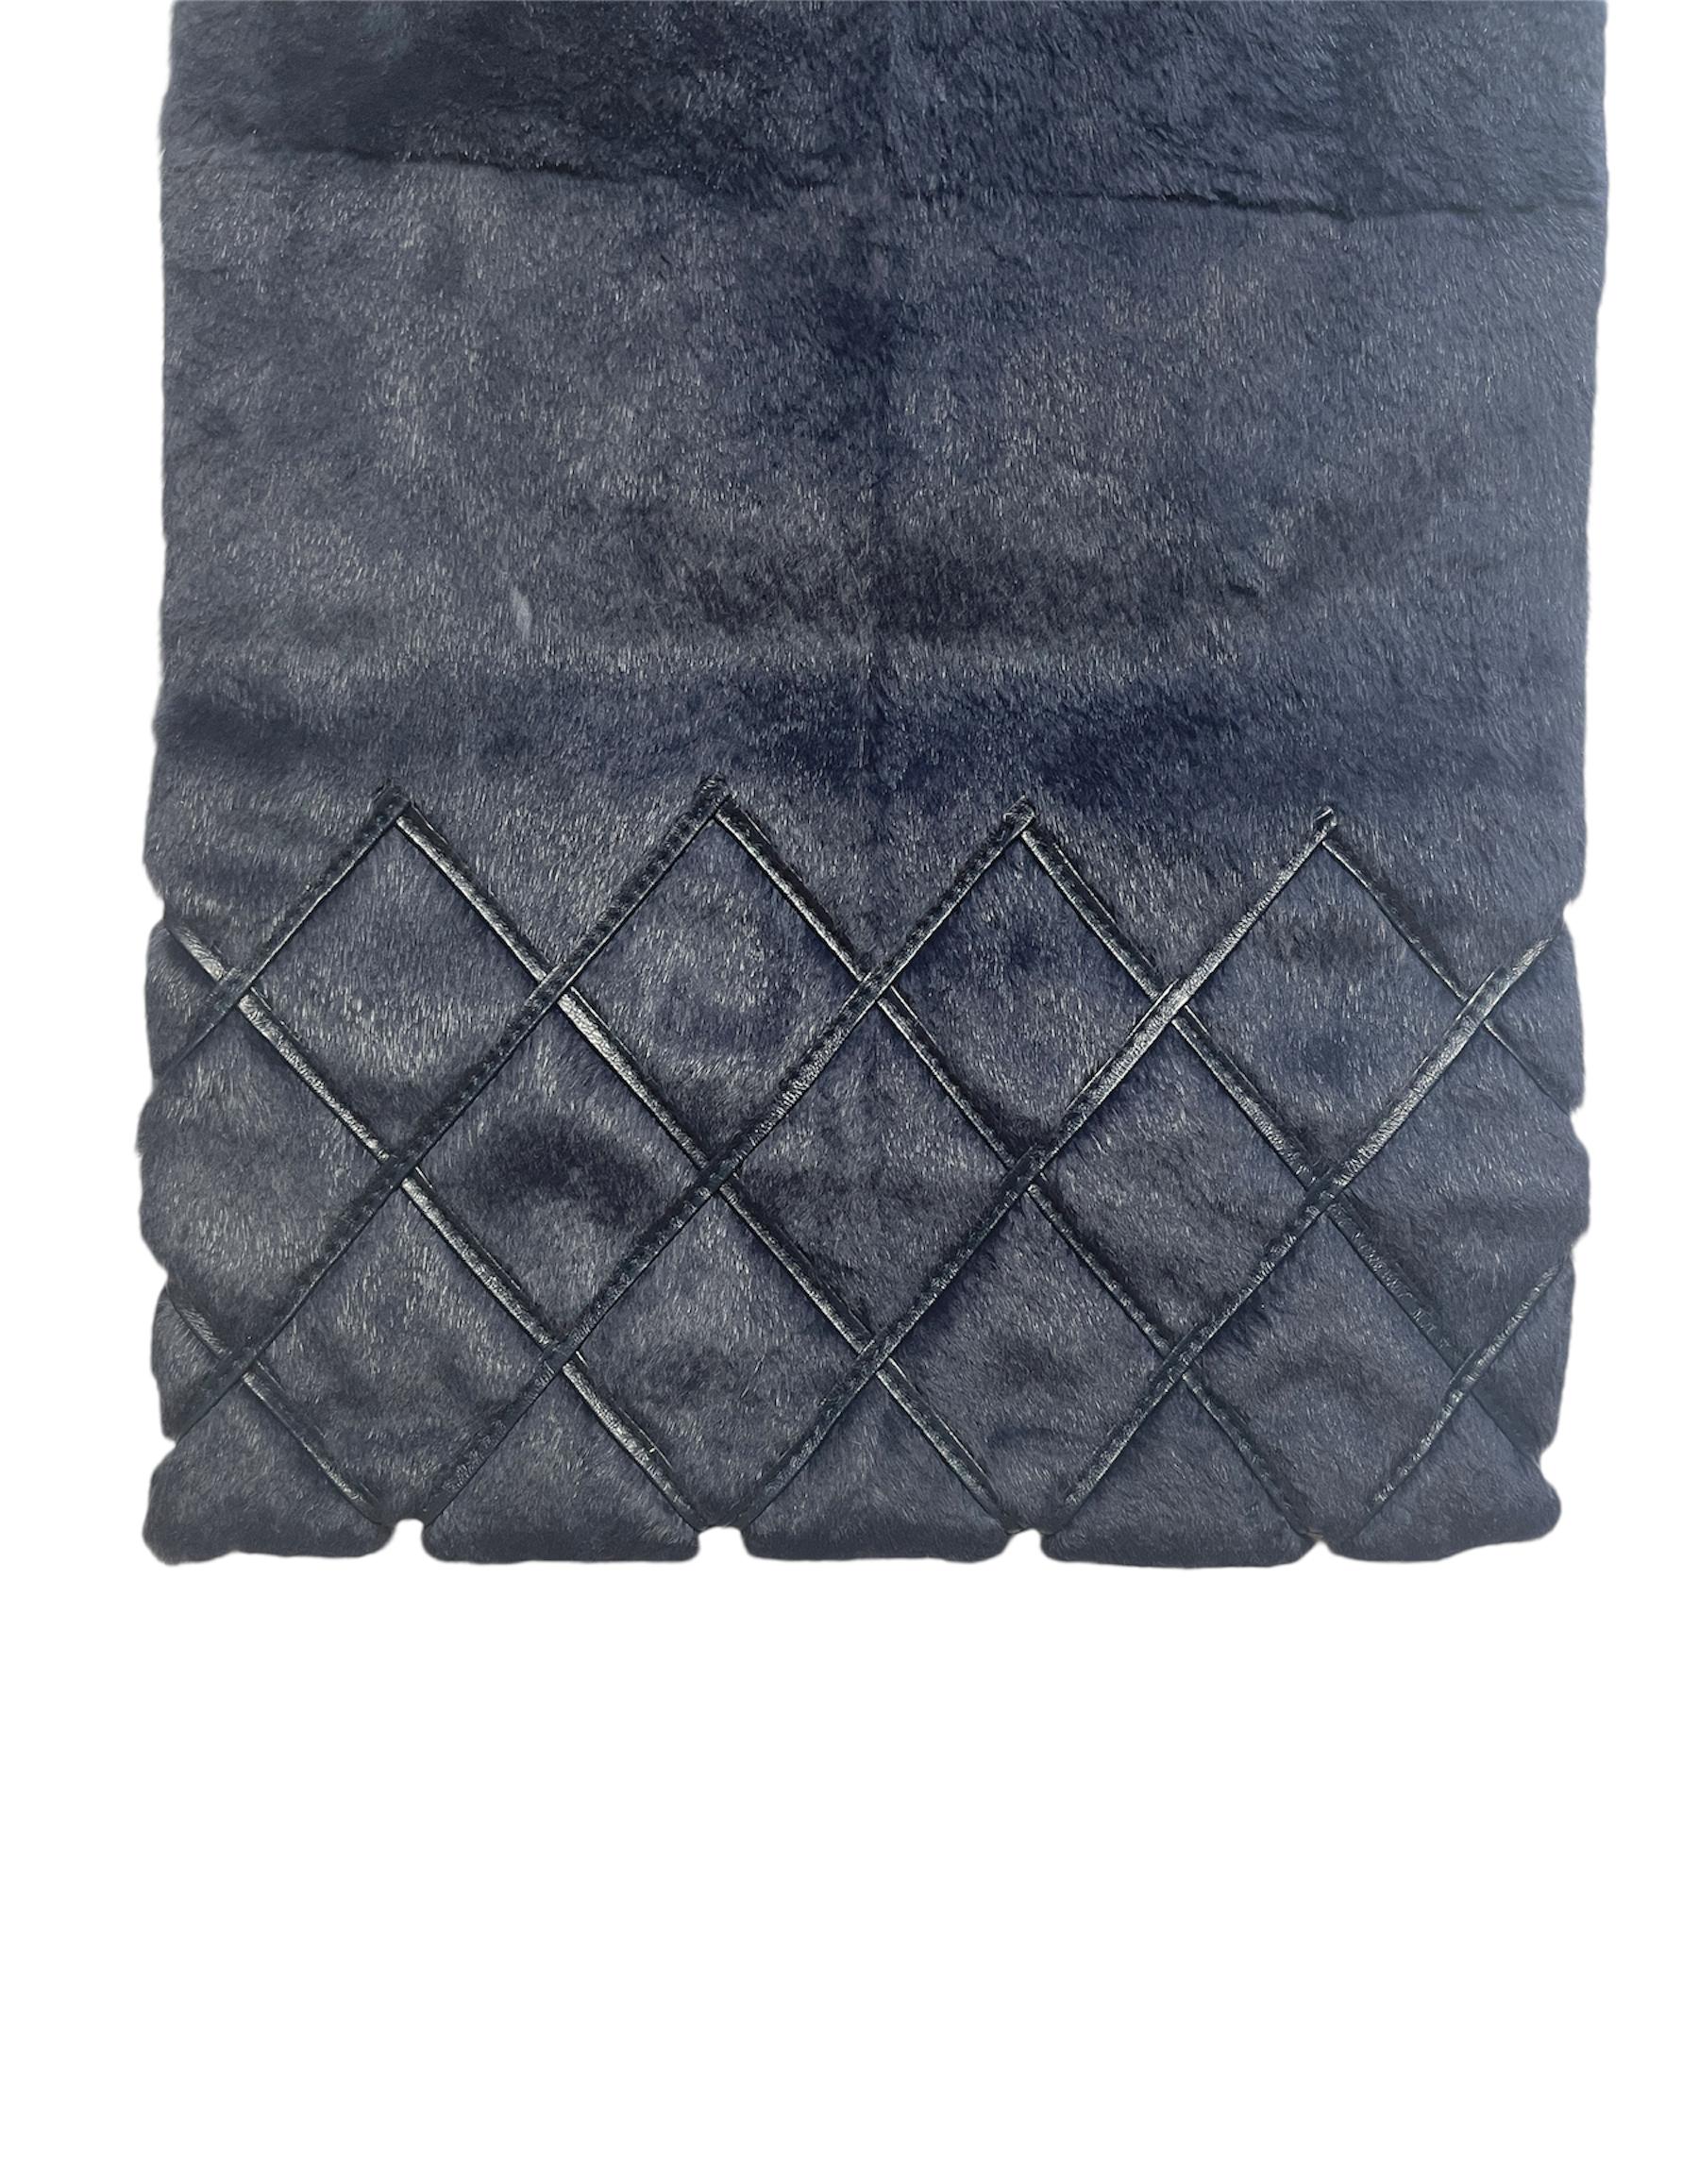 Noir Chanel - Stitch by Stitch by Stitch by Leather Quilted en vente